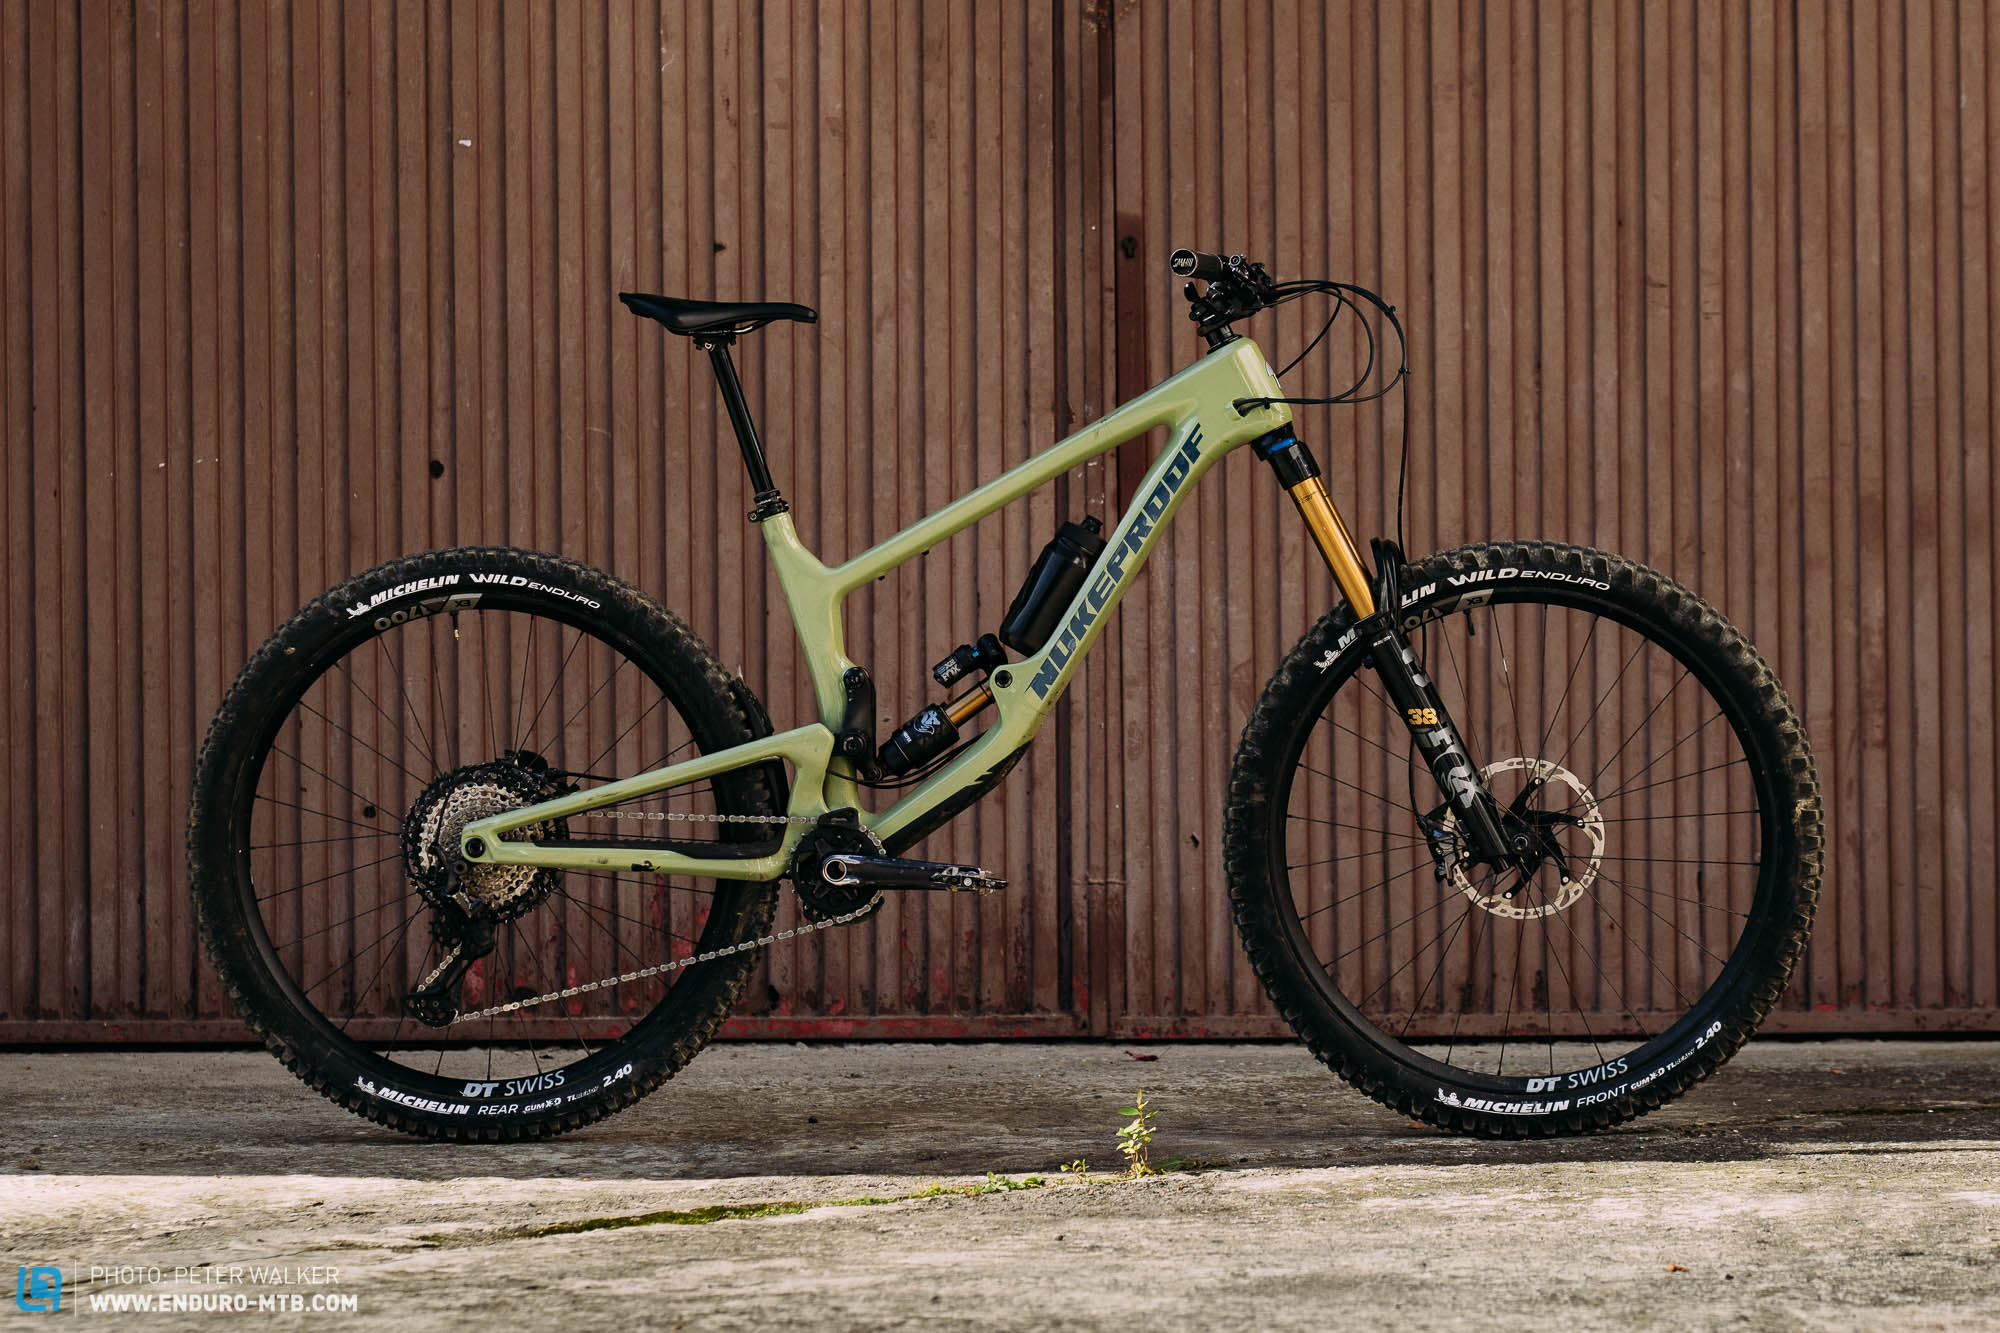 Nukeproof Giga  Carbon Factory  – In our big enduro bike